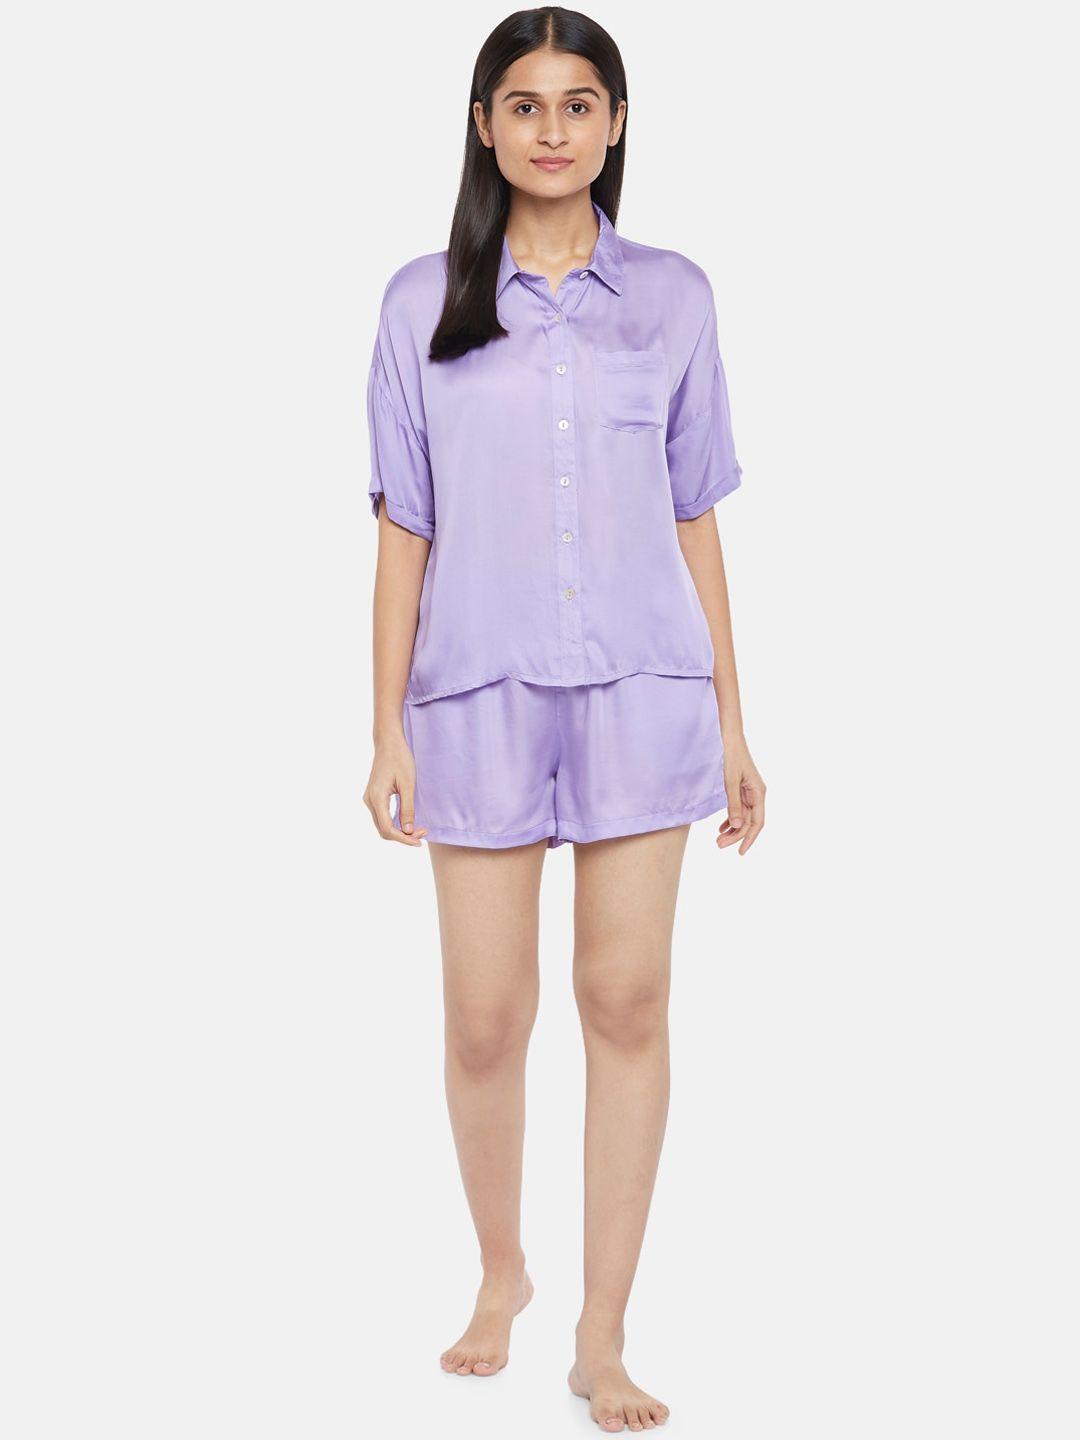 dreamz-by-pantaloons-women-lavender-solid-night-suit